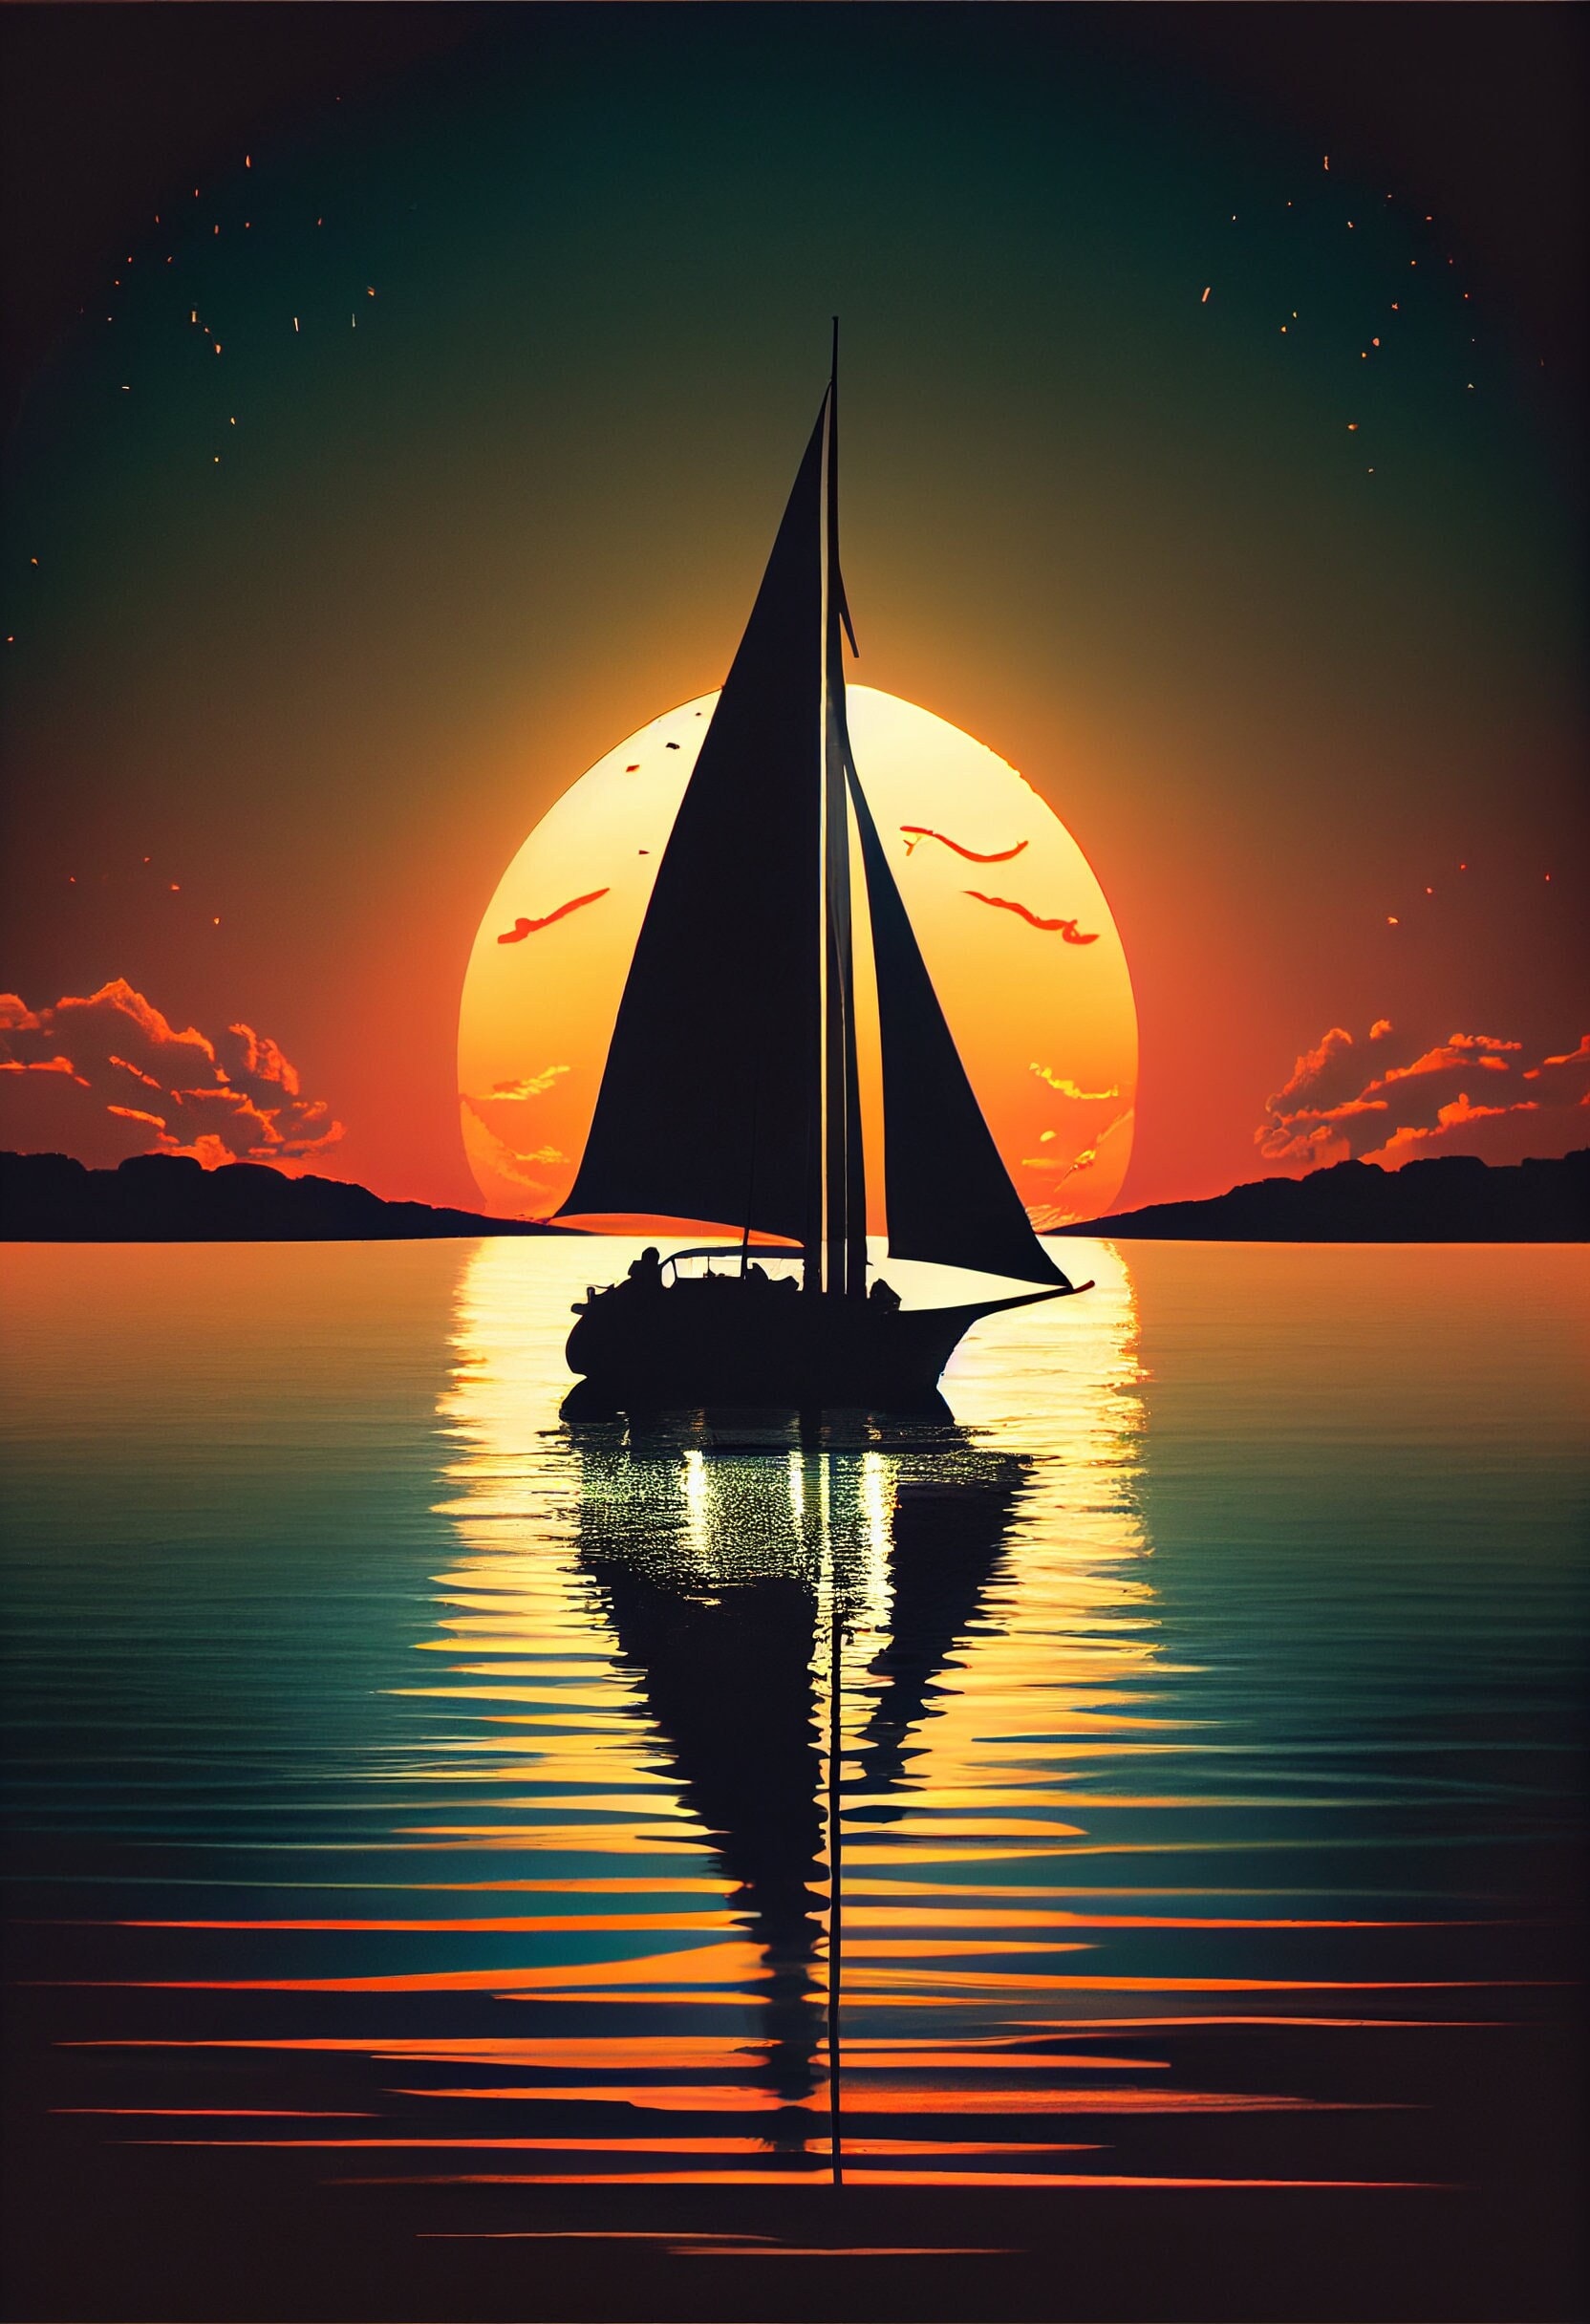 Sailboat in a Sunset, Digital Print Download - Etsy